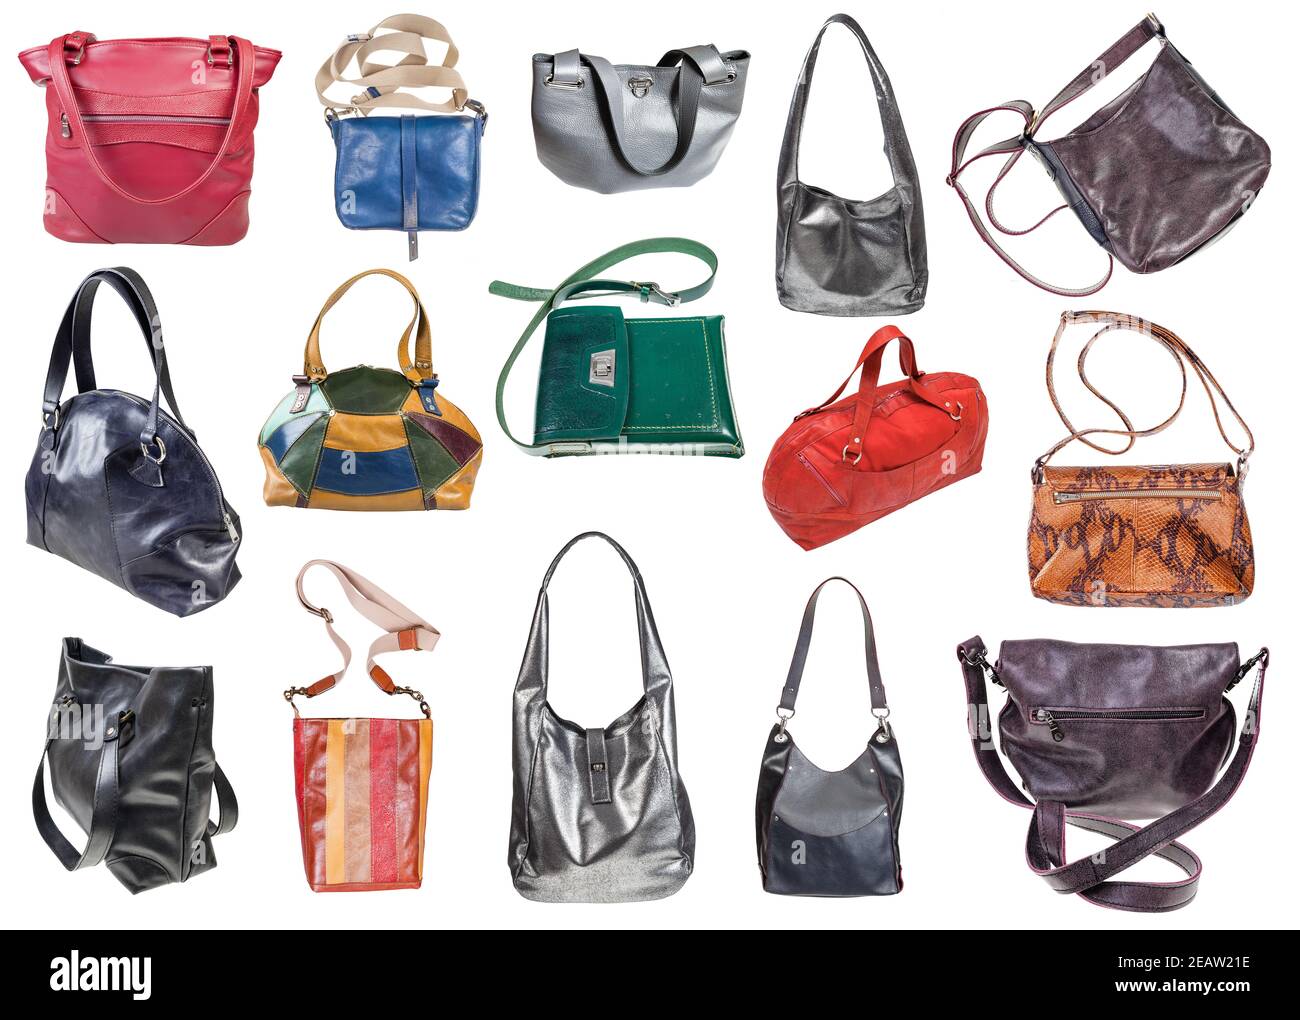 collection of handcrafted ladies leather bags Stock Photo